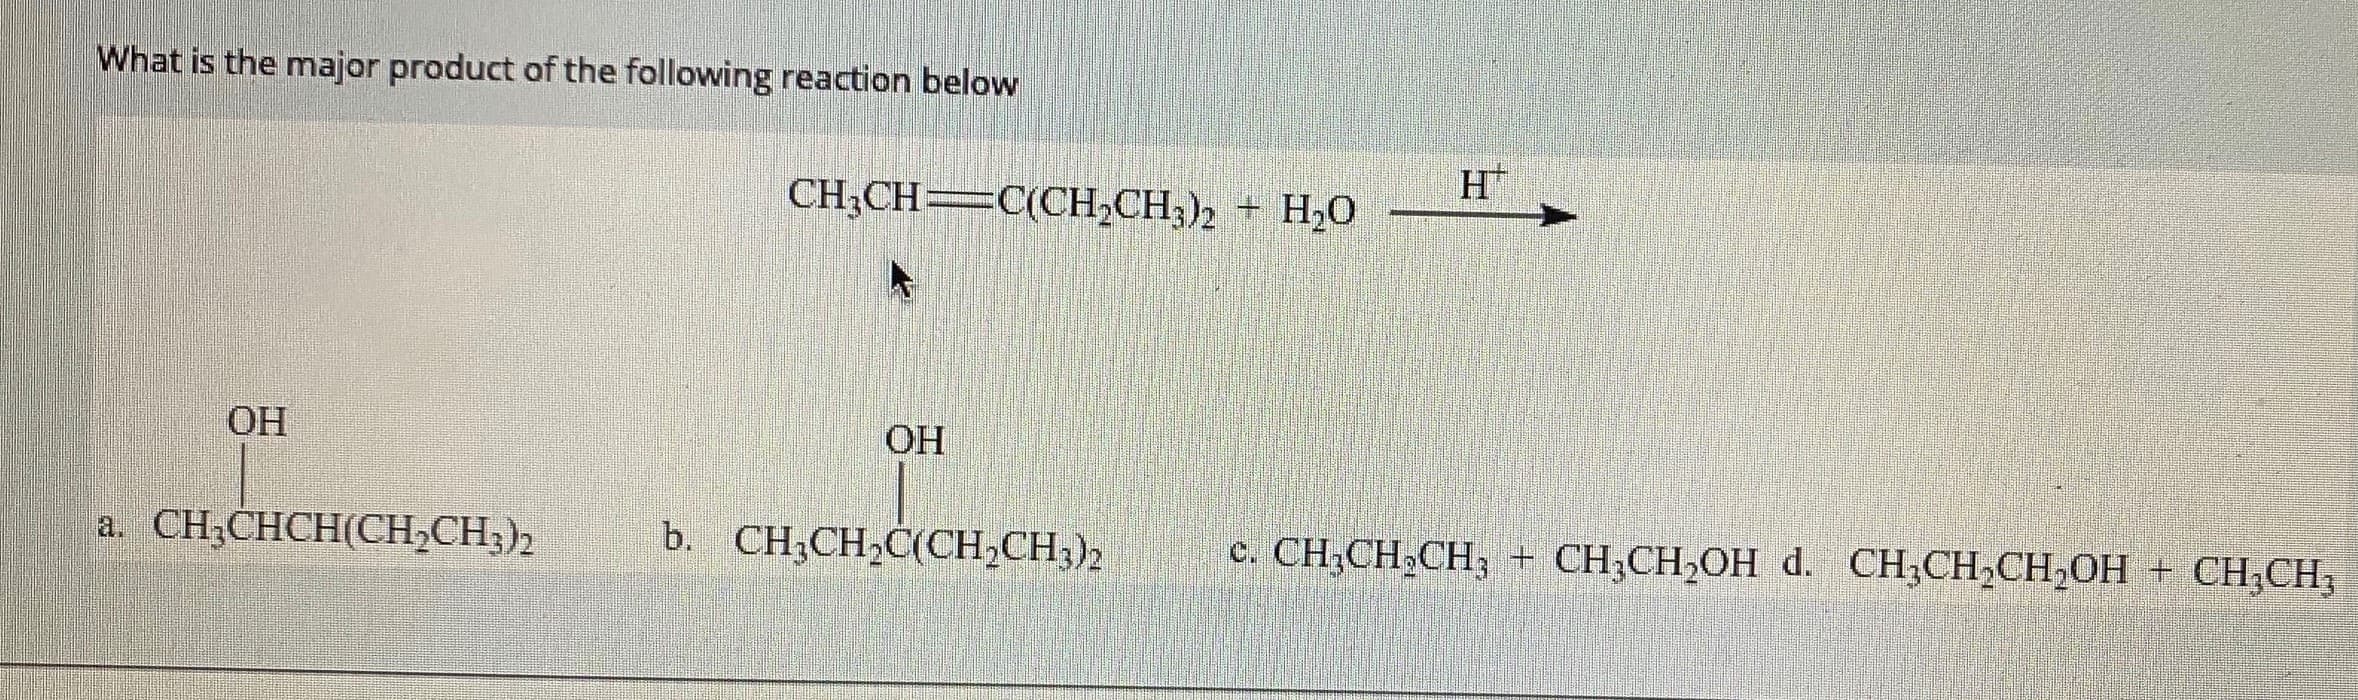 What is the major product of the following reaction below
H.
CH CH —ССн-CН) + Н,О
ОН
ОН
CH CH,
a CH,CHCH(CH;CH)»
b. CH;CH,C(CH,CH,),
c. CH.CH,CH, = CH,CH,OH d. CH;CH,CH,OH
